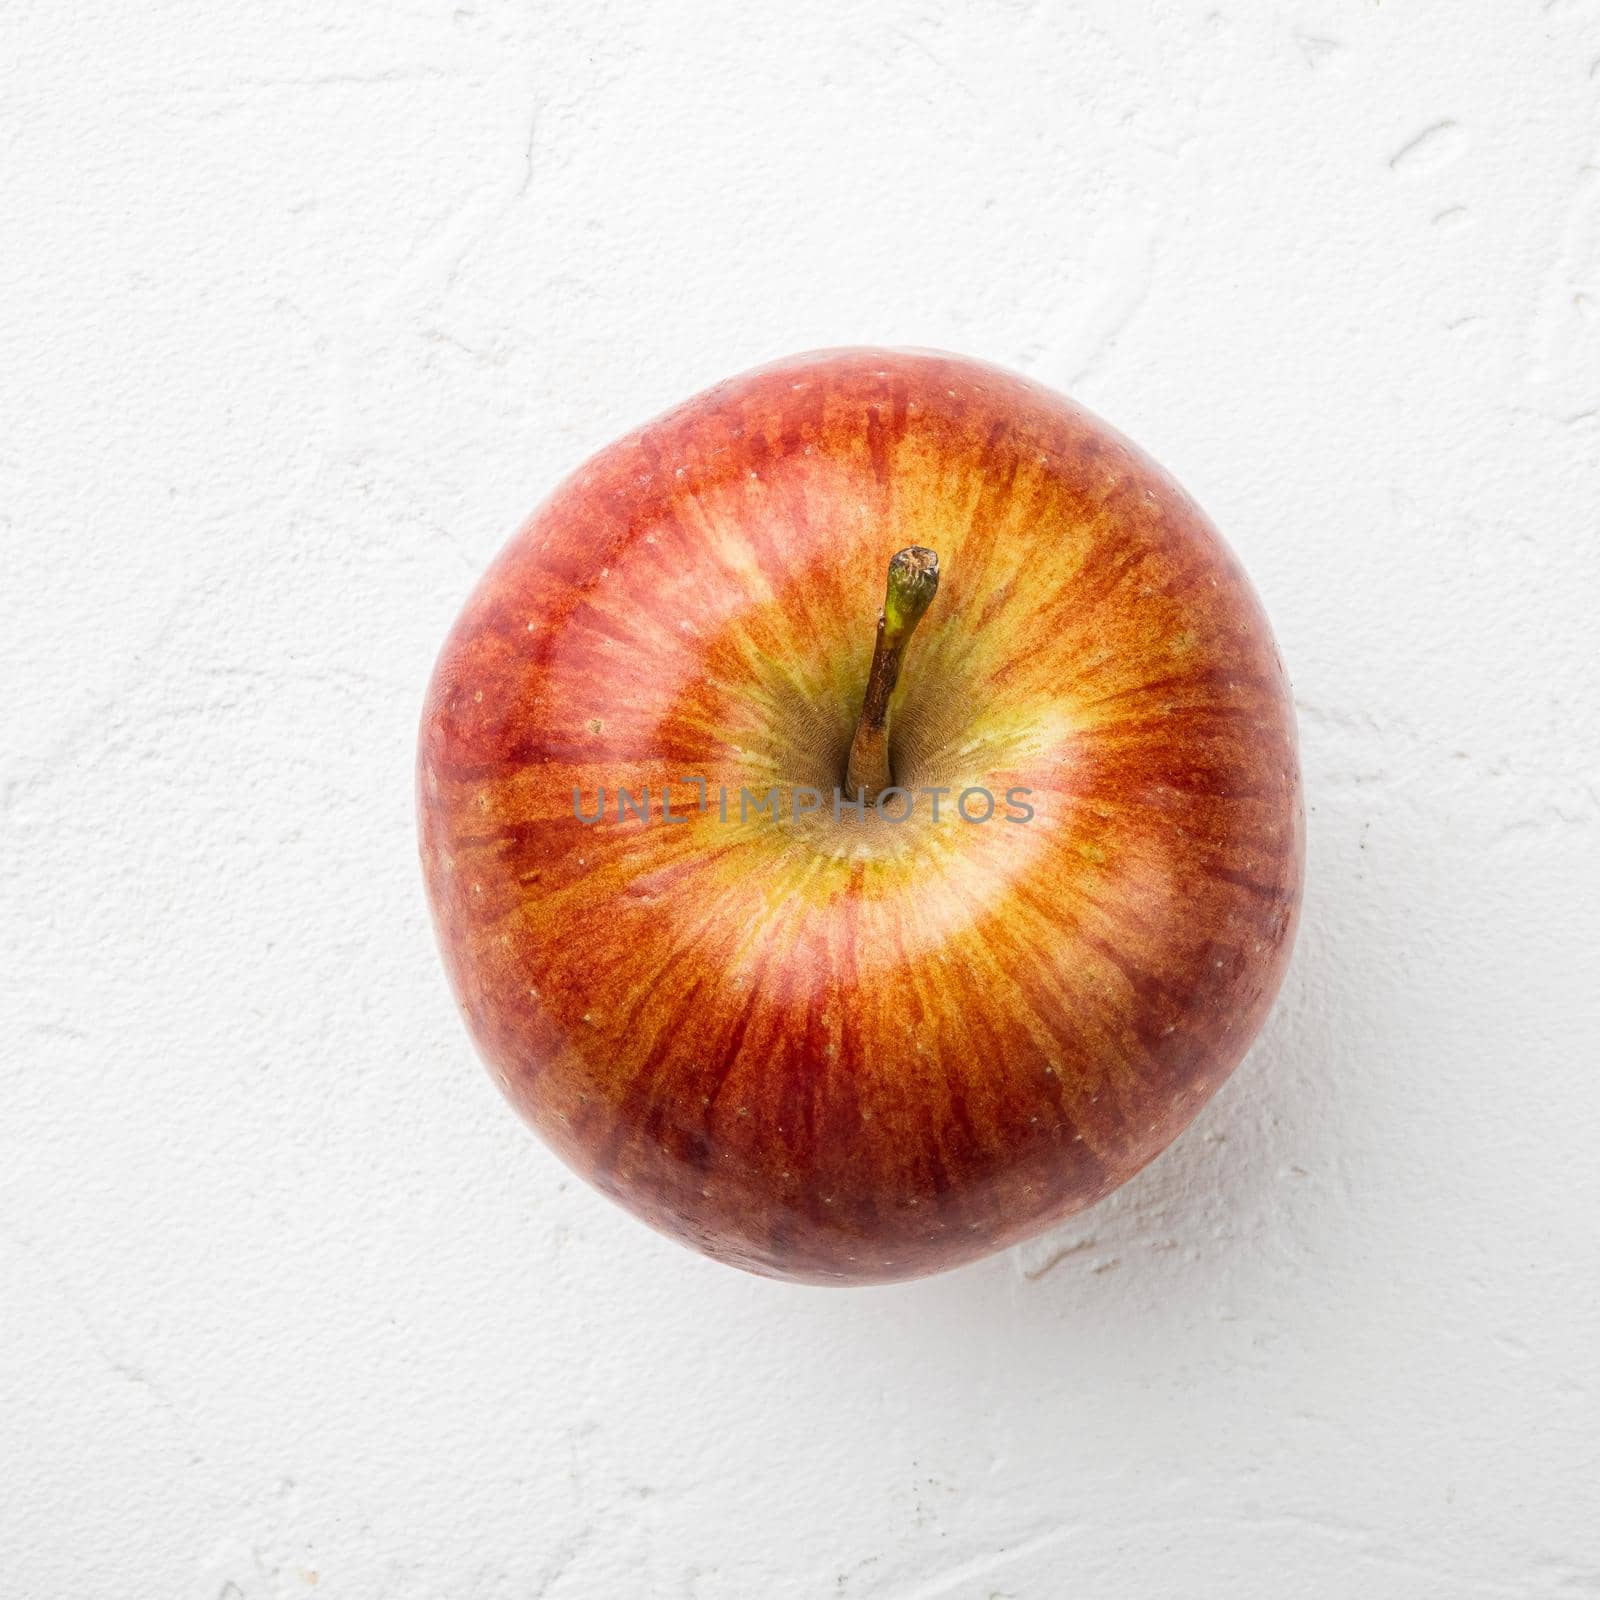 Red apple, on white stone table background, square format, top view flat lay by Ilianesolenyi